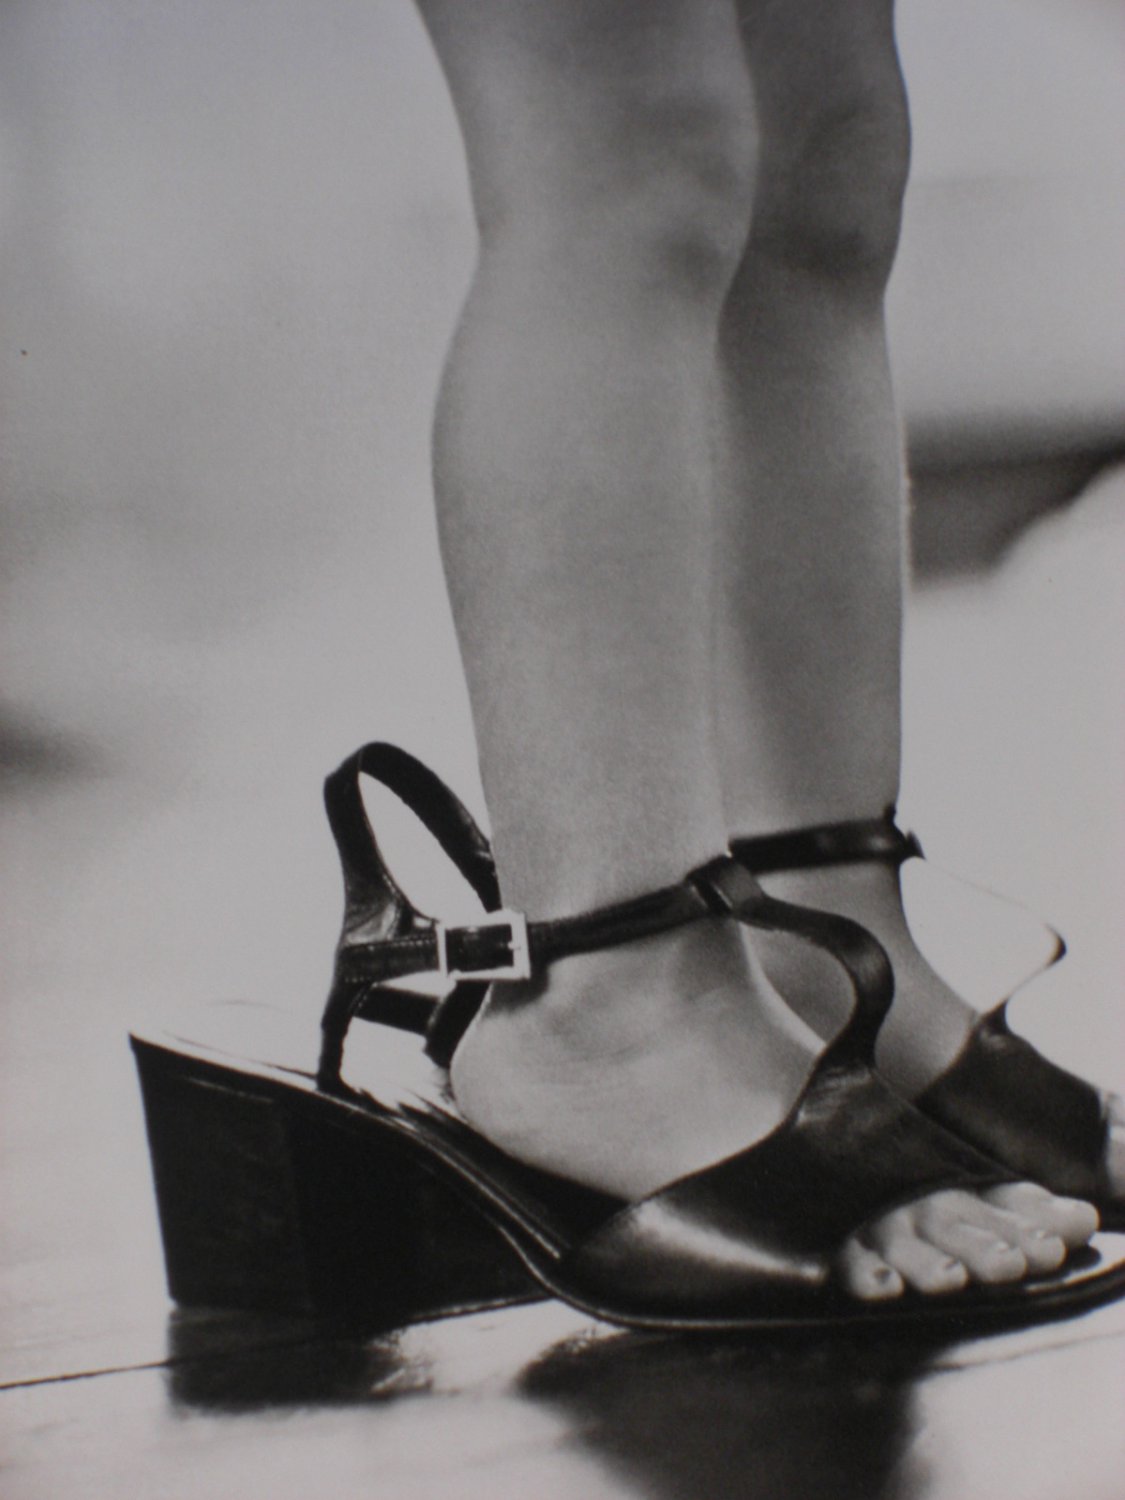 Nouvelles Images Postcard Little Girl With Her Mother's Shoes 2007